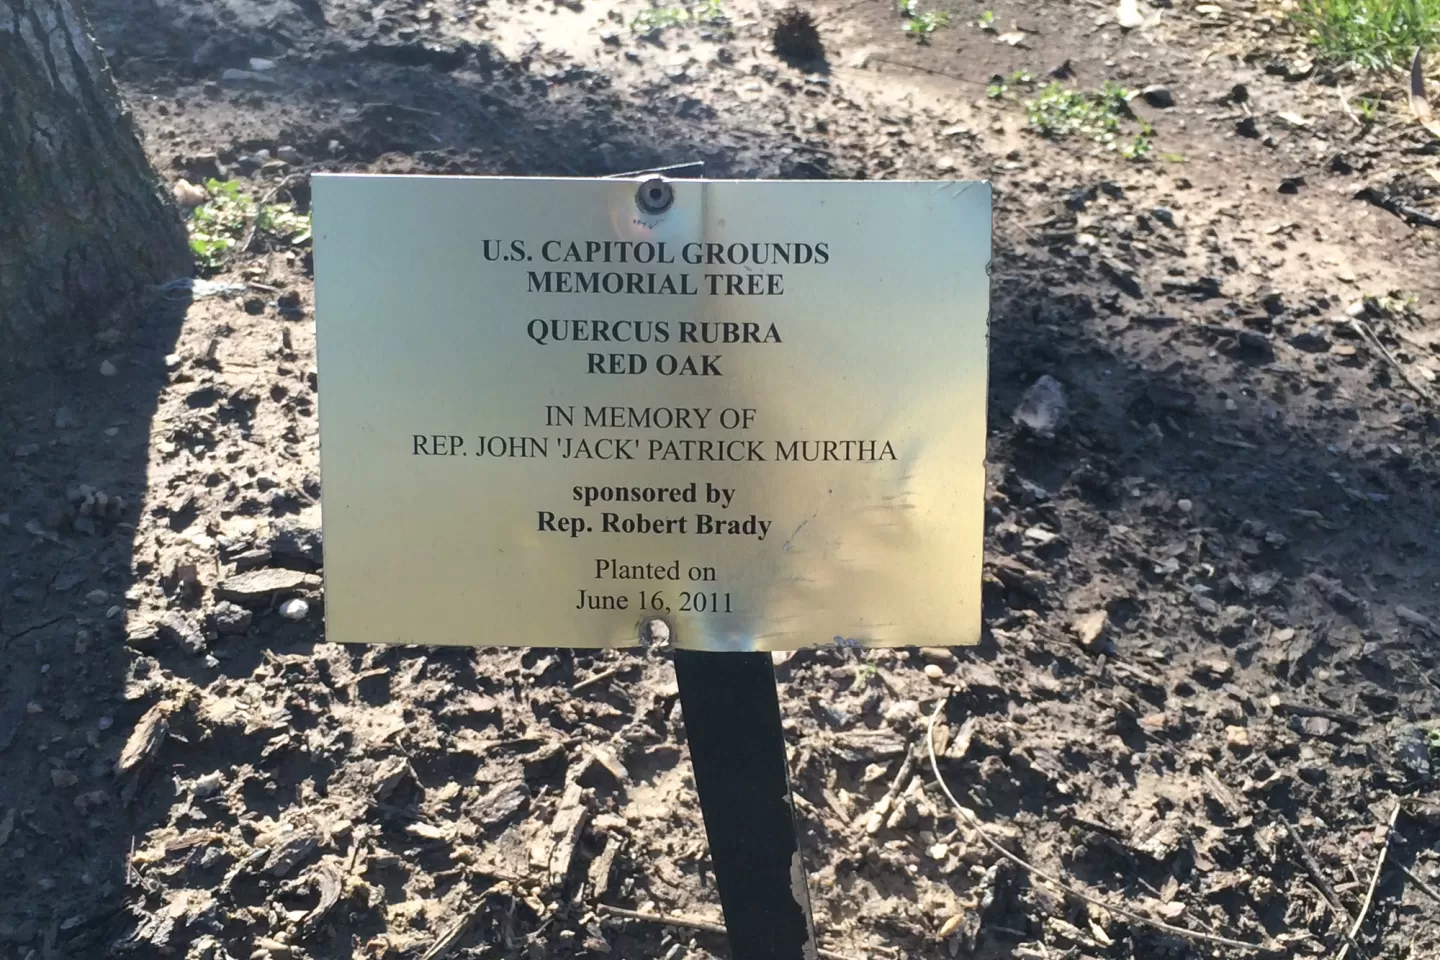 Plaque that reads: U.S. Capitol Grounds Memorial Tree  Quercus rubra (Red Oak)  In Memory of Rep. John ‘Jack’ Patrick Murtha  sponsored by Rep. Robert Brady  Planted on June 16, 2011